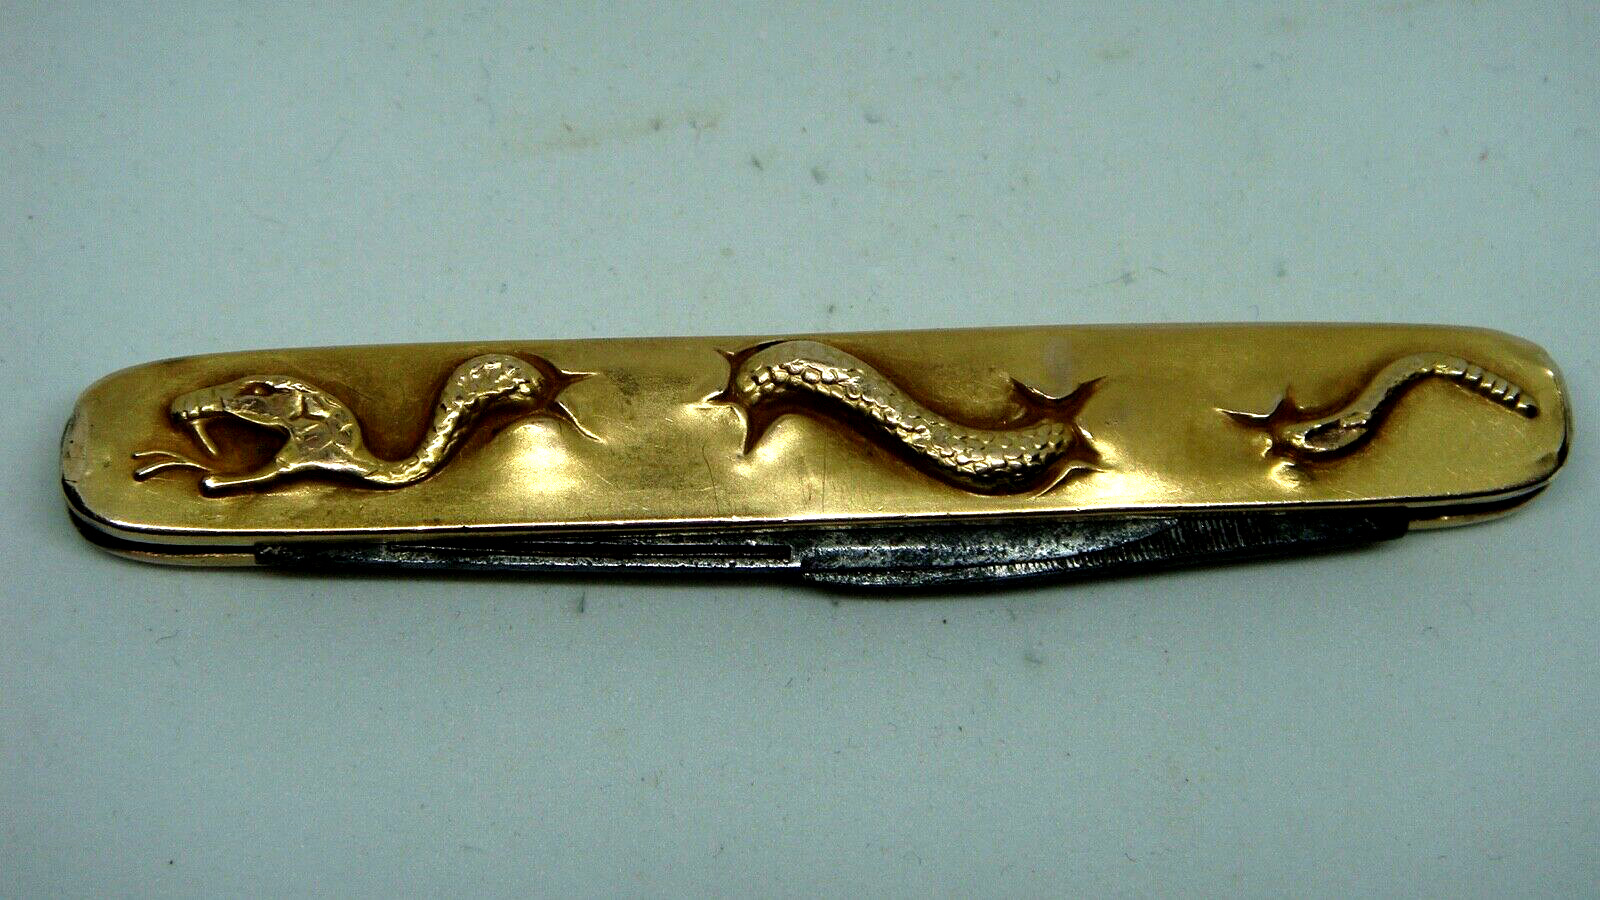 ANTIQUE GERMAN L & K PEN KNIFE WITH GOLD REPOUSSE RATTLESNAKE HANDLE - VERY RARE